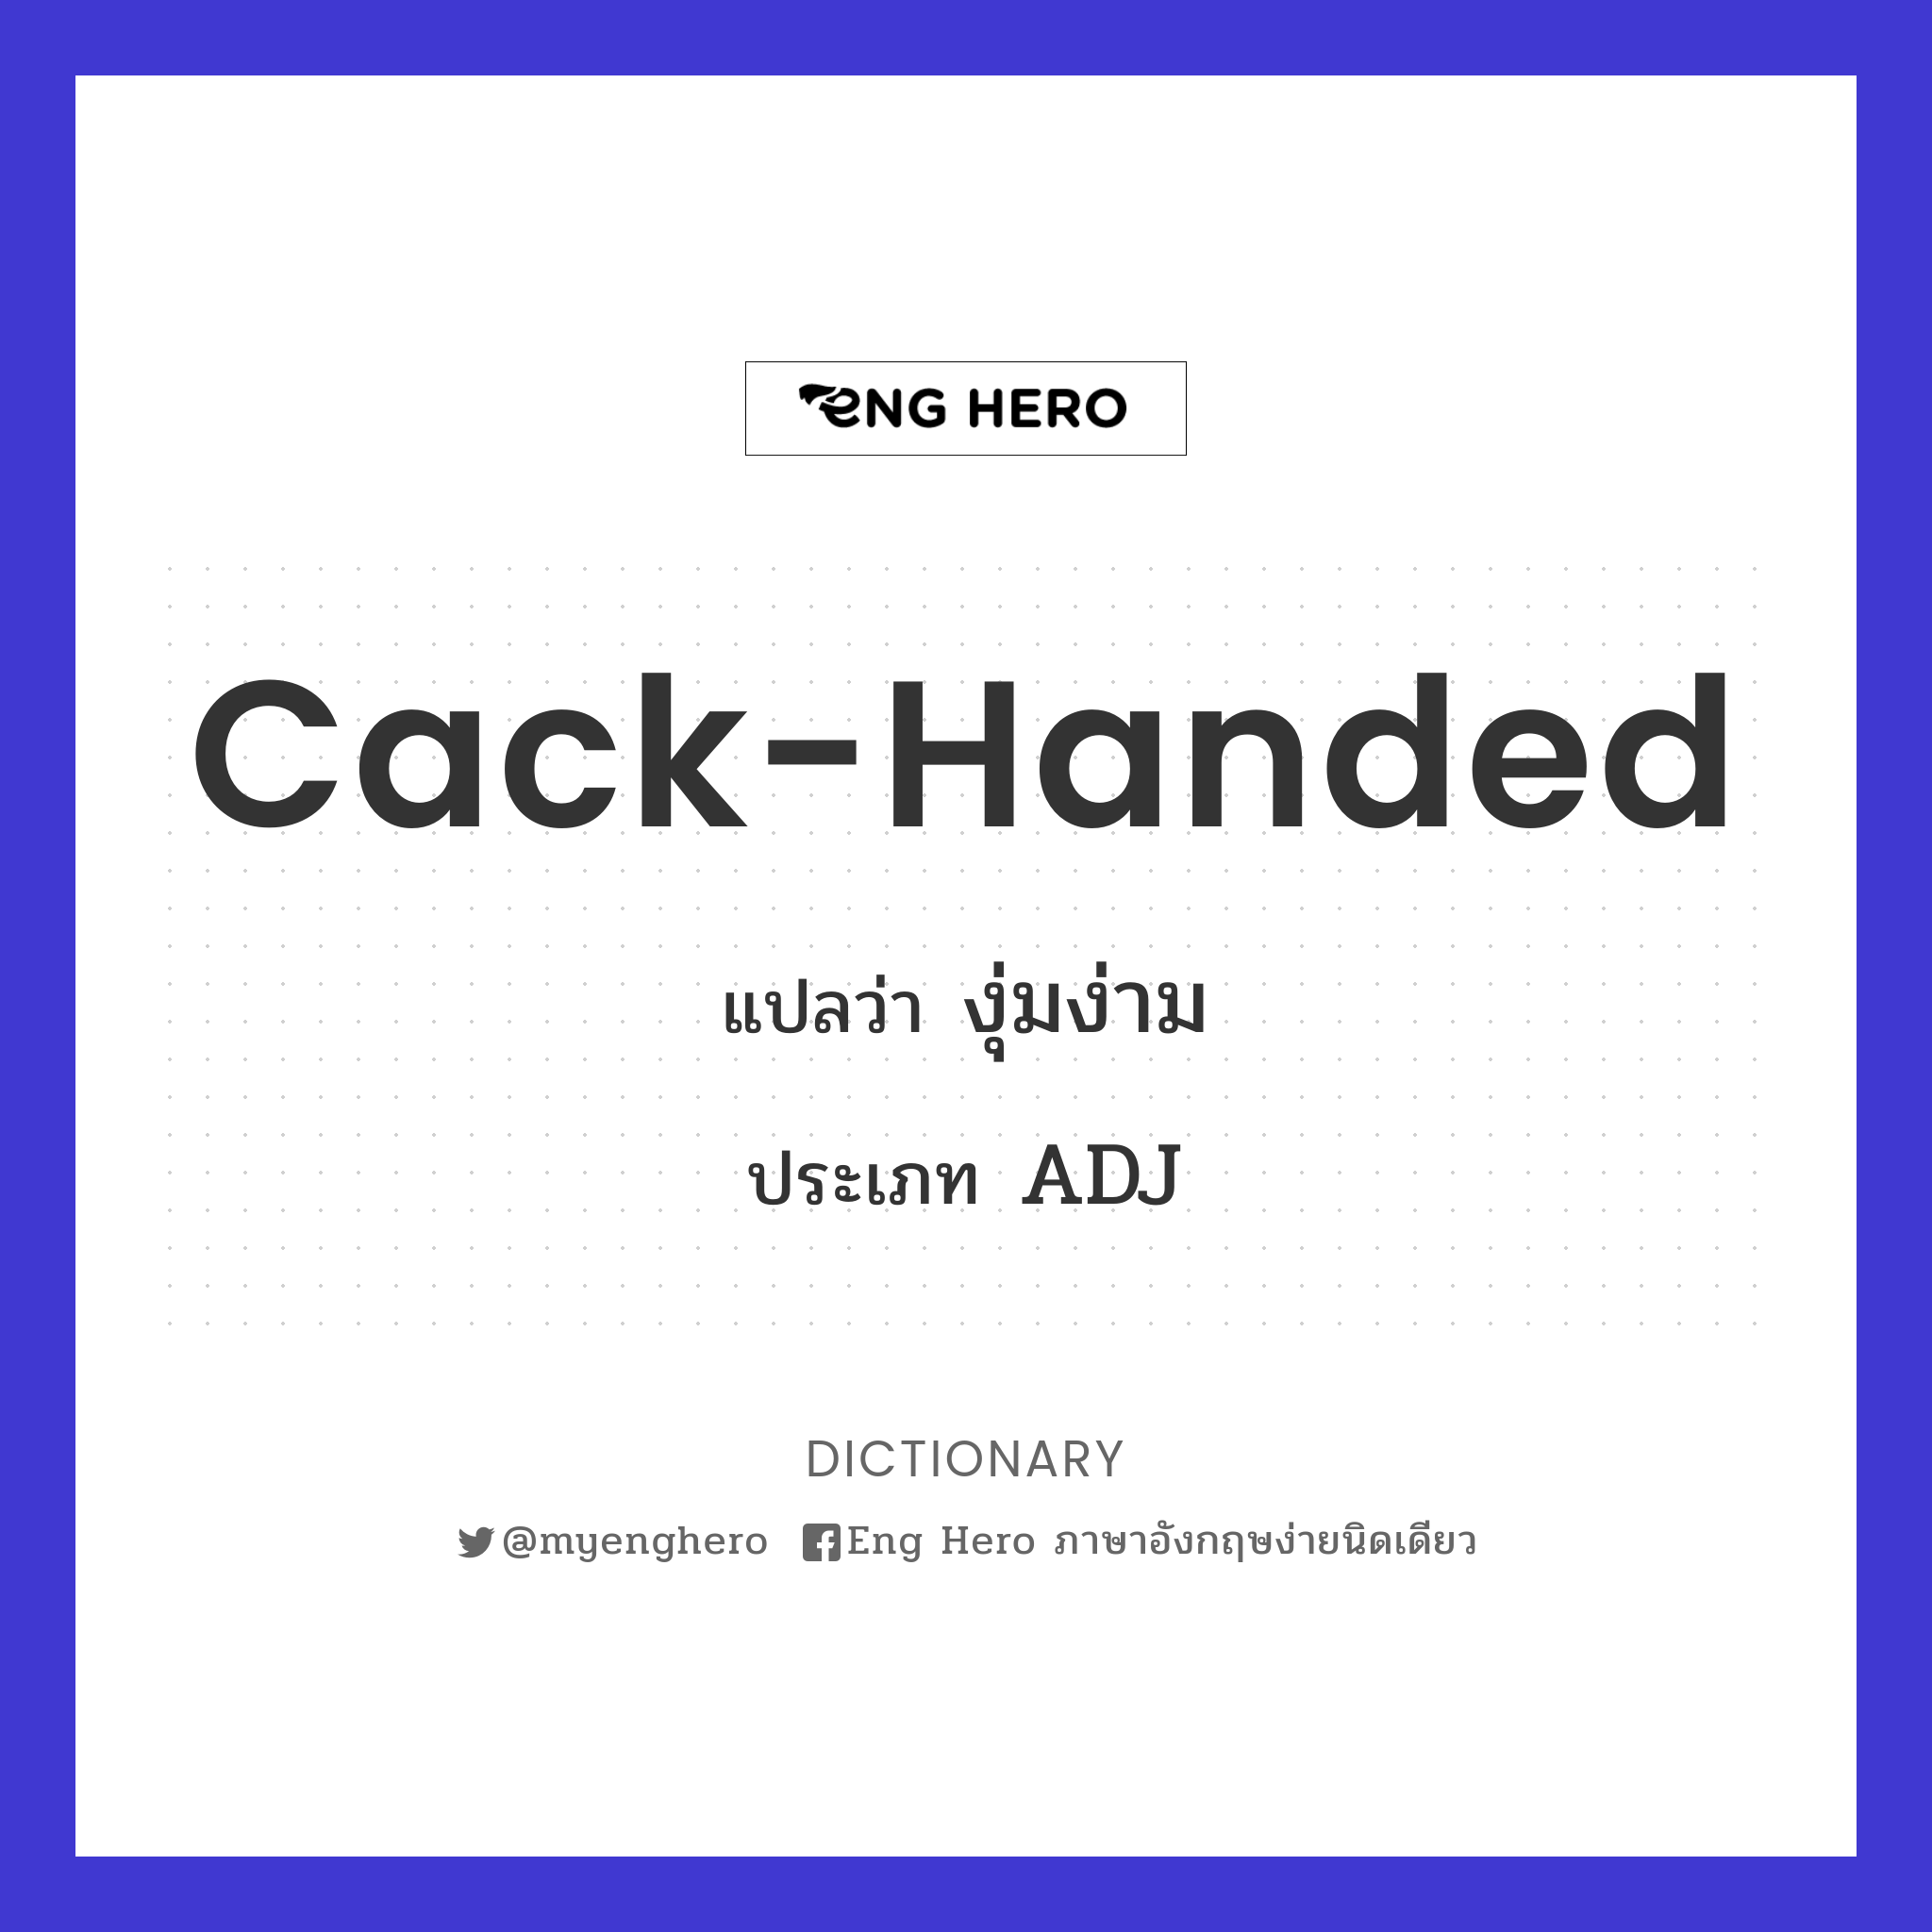 cack-handed